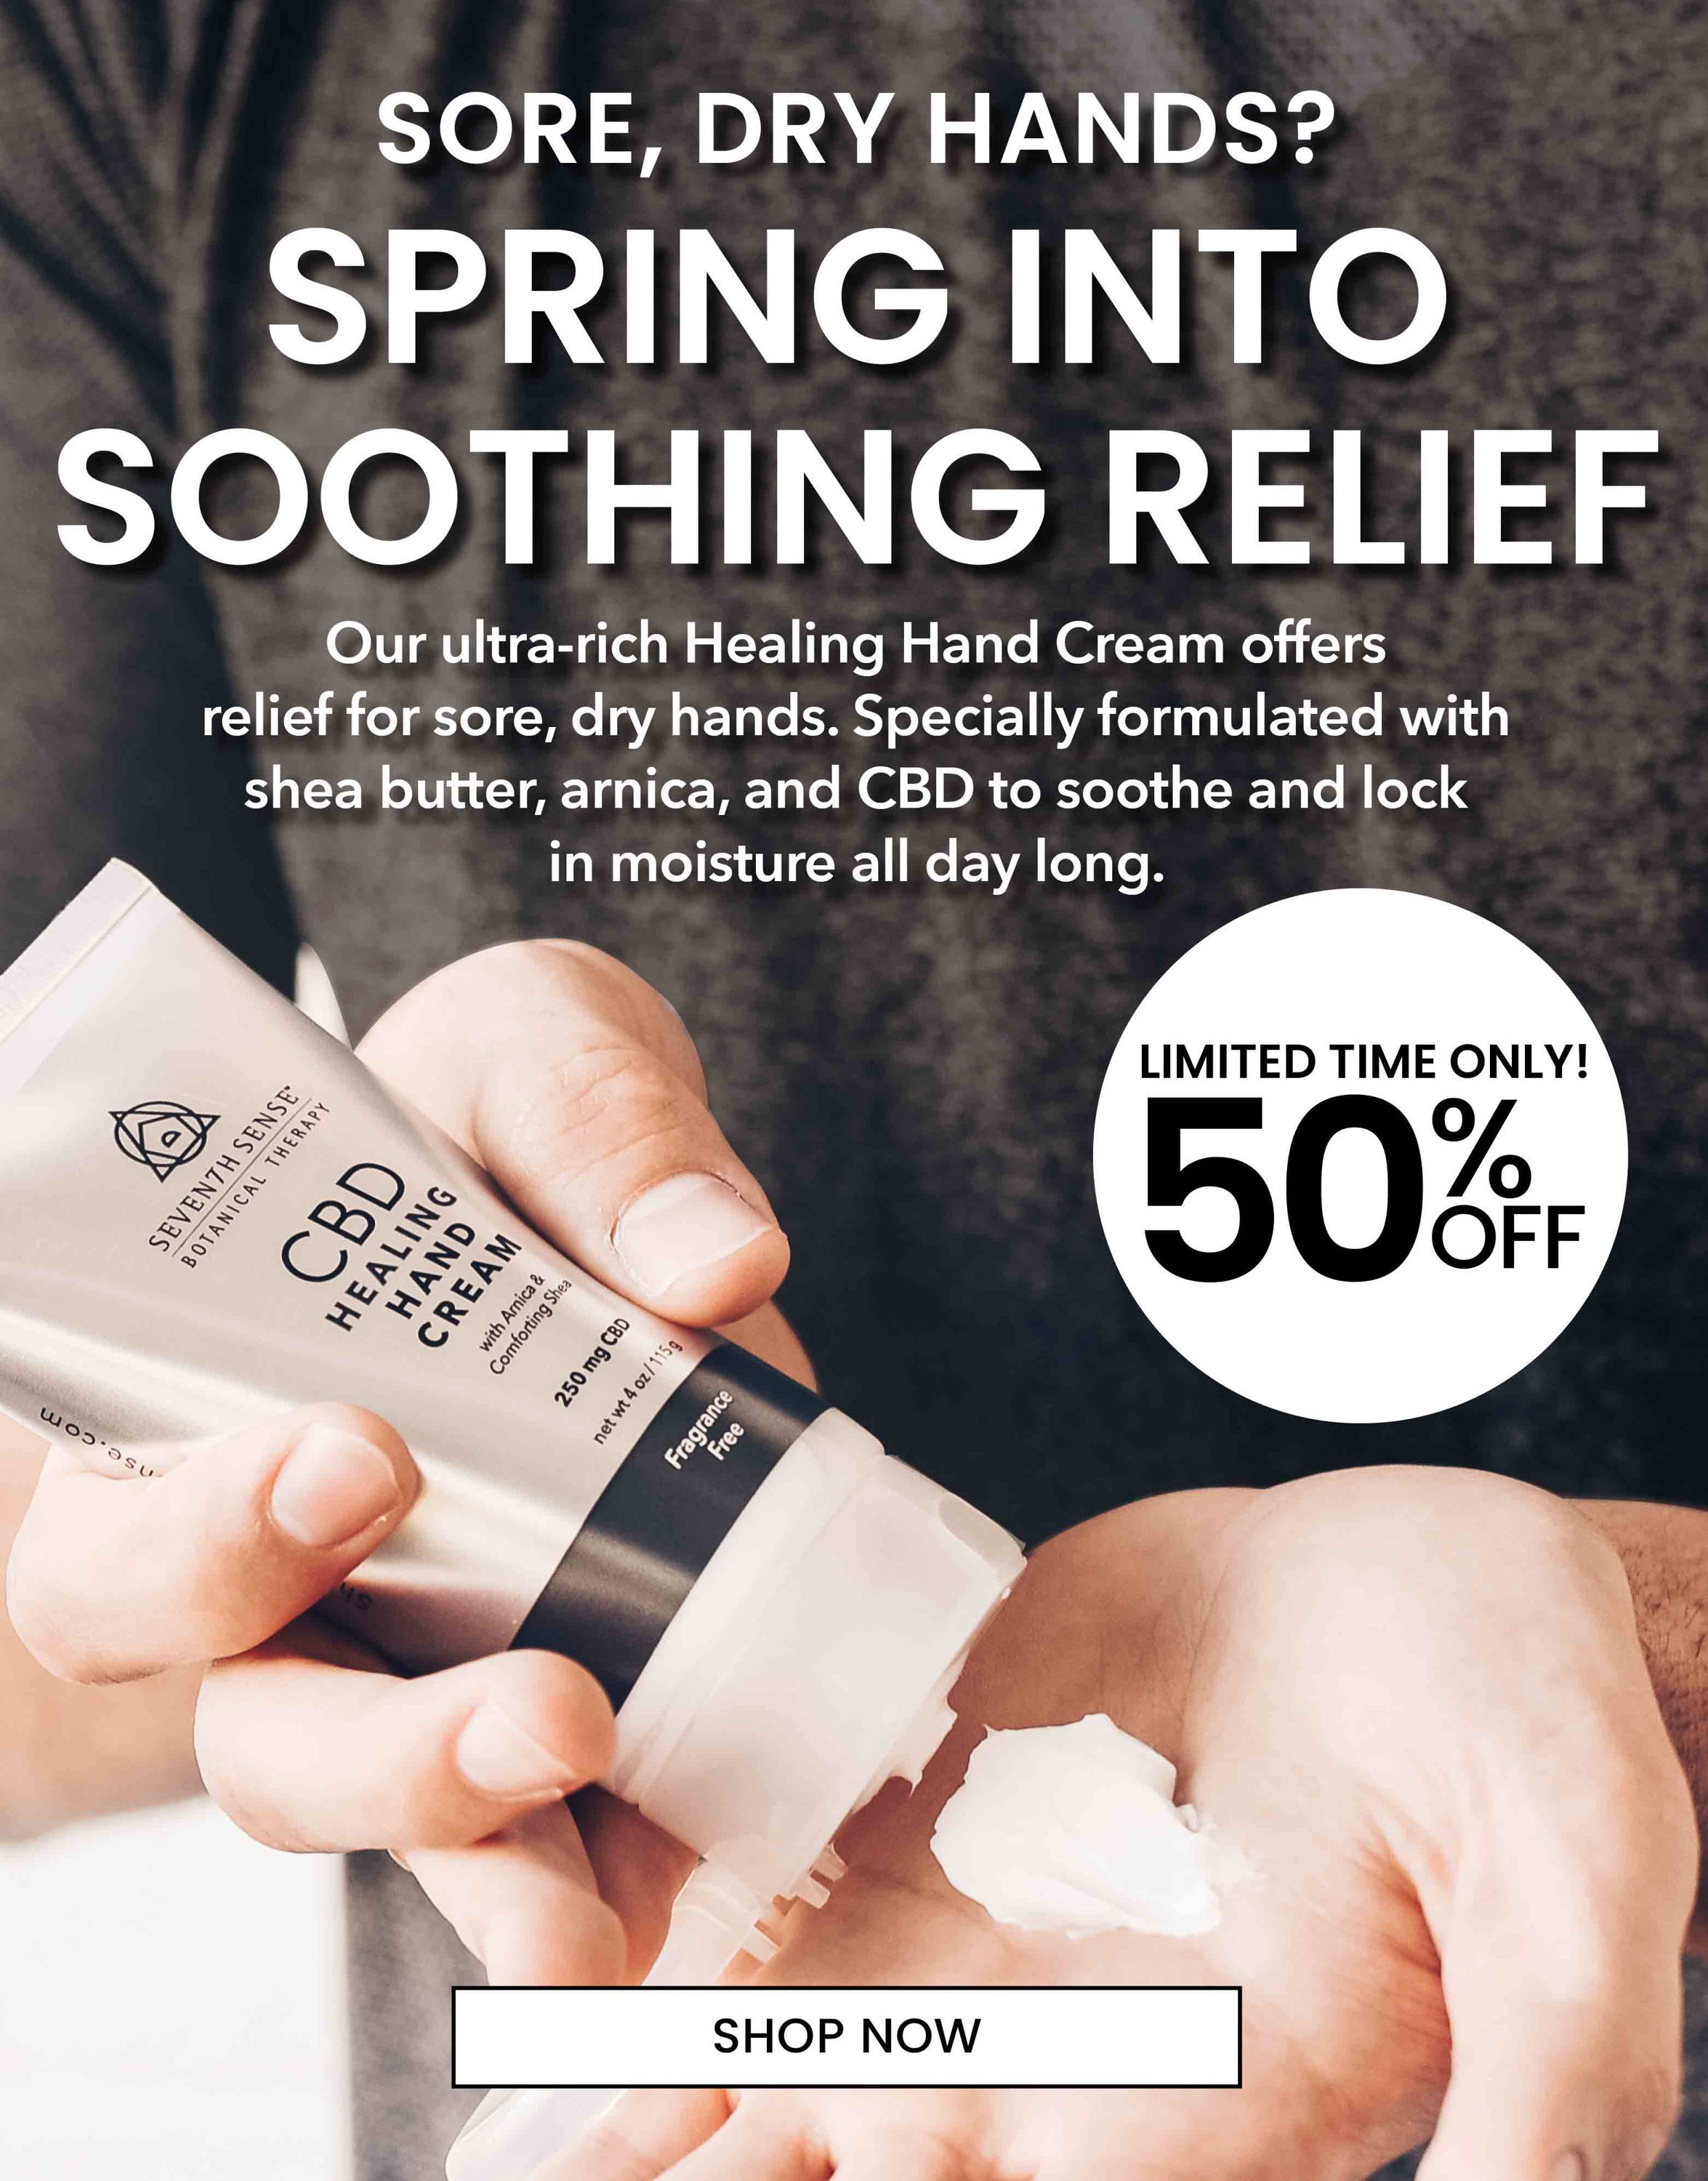 Limited Time Only! 50% Off Healing Hand Creams. While supplies last.